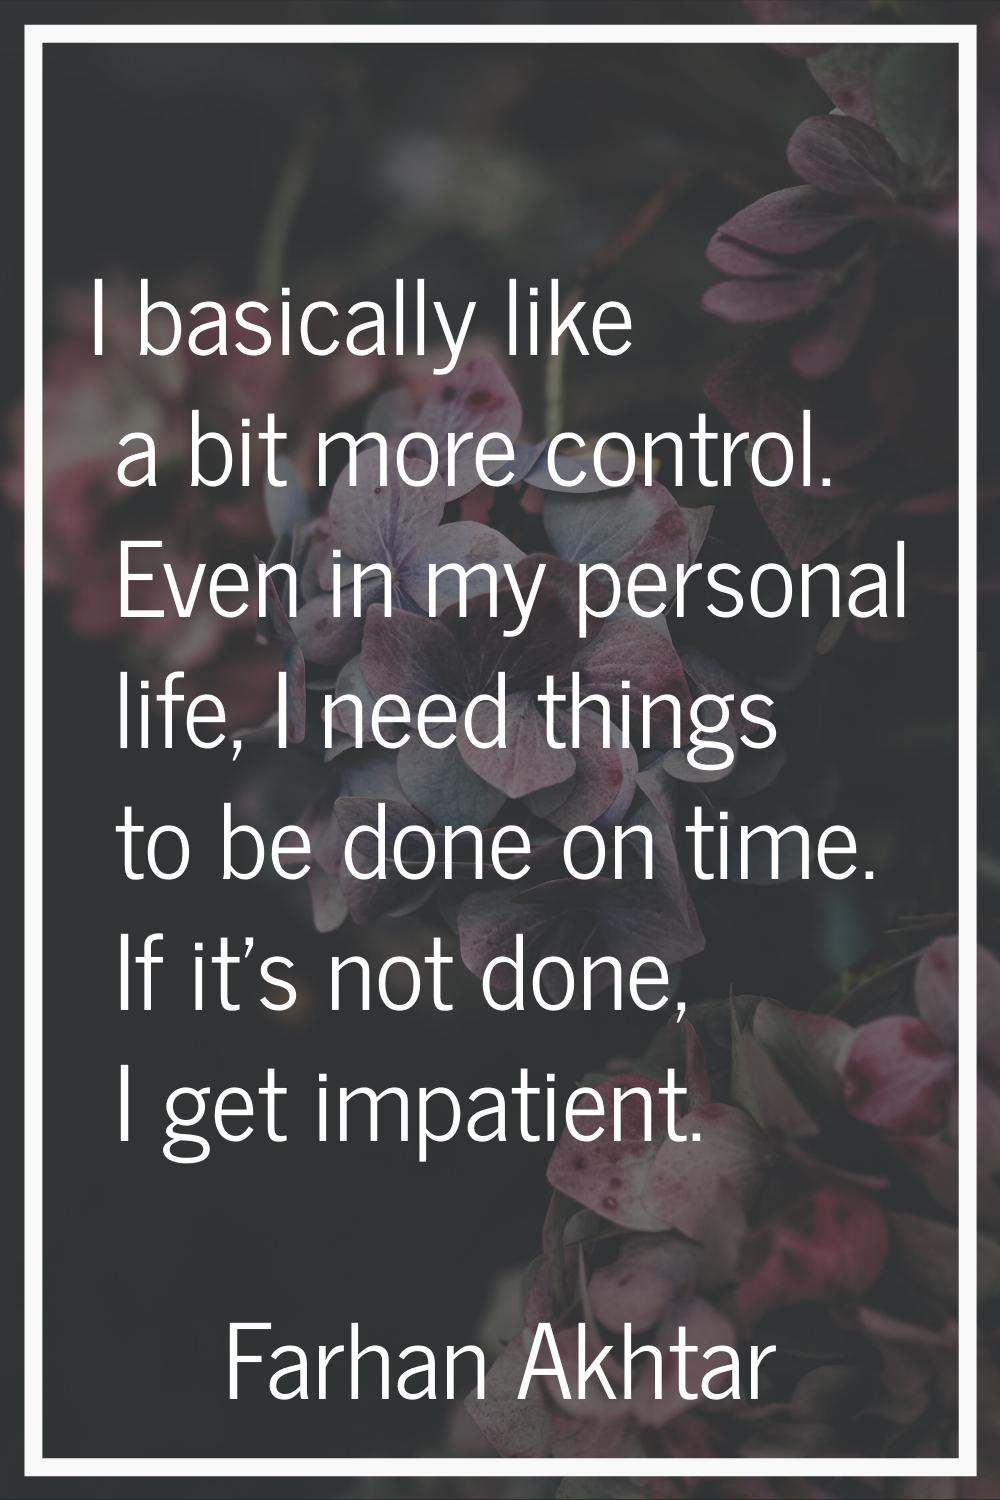 I basically like a bit more control. Even in my personal life, I need things to be done on time. If